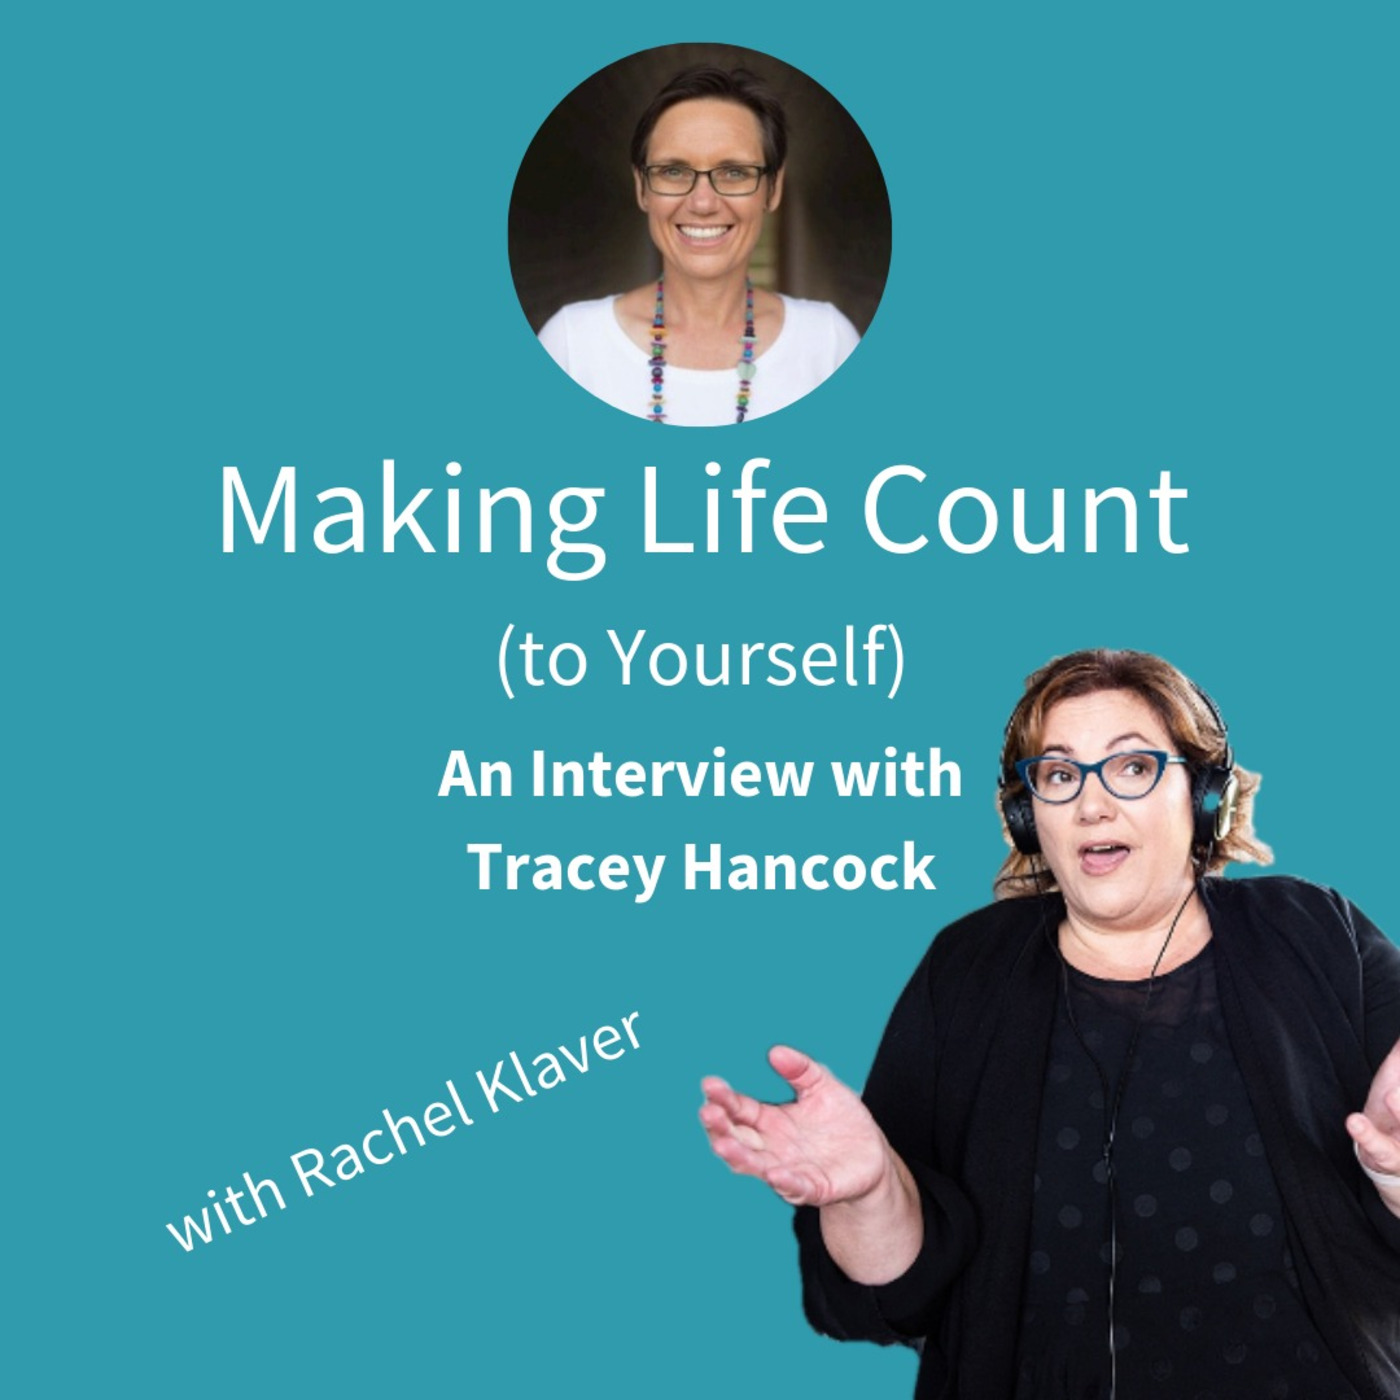 Making Life Count to Yourself - An interview with Tracey Hancock